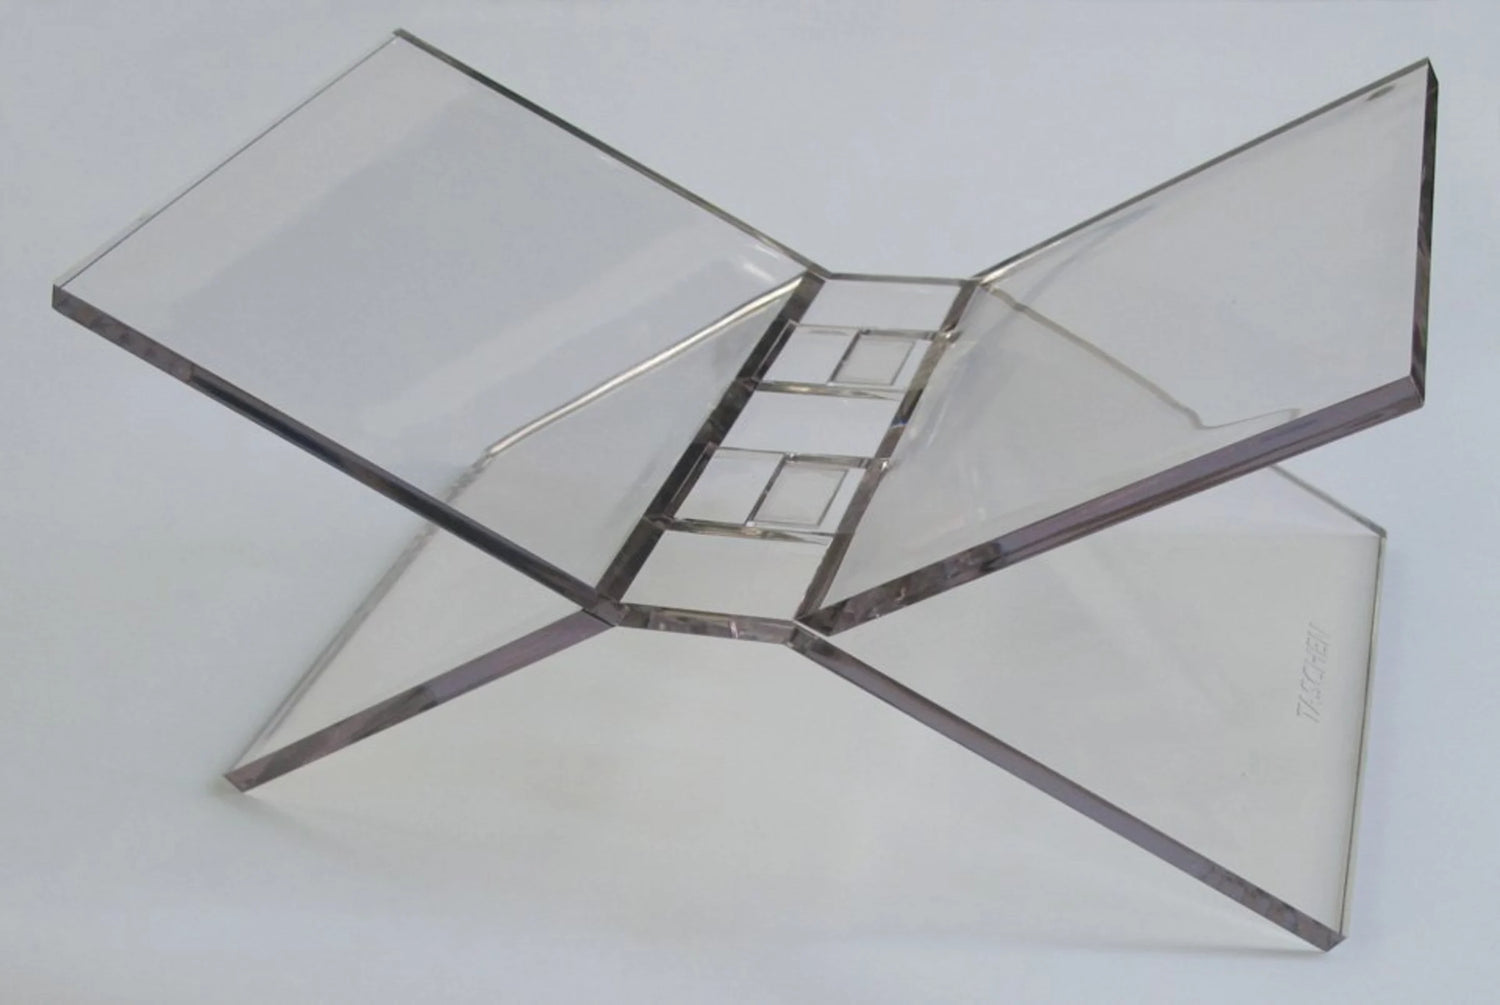 Acrylic Book Stand